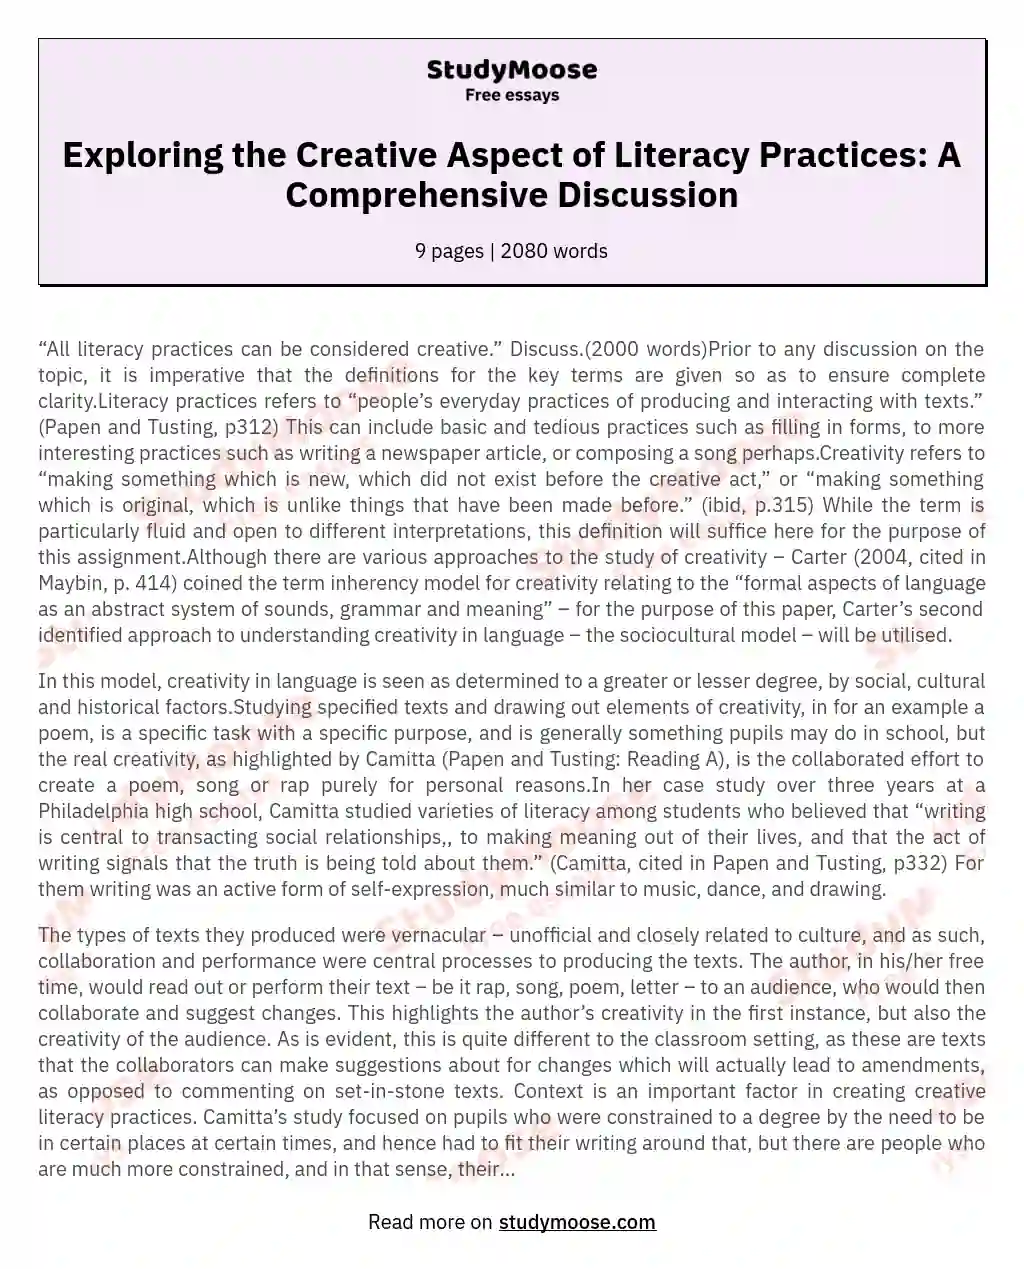 Exploring the Creative Aspect of Literacy Practices: A Comprehensive Discussion essay